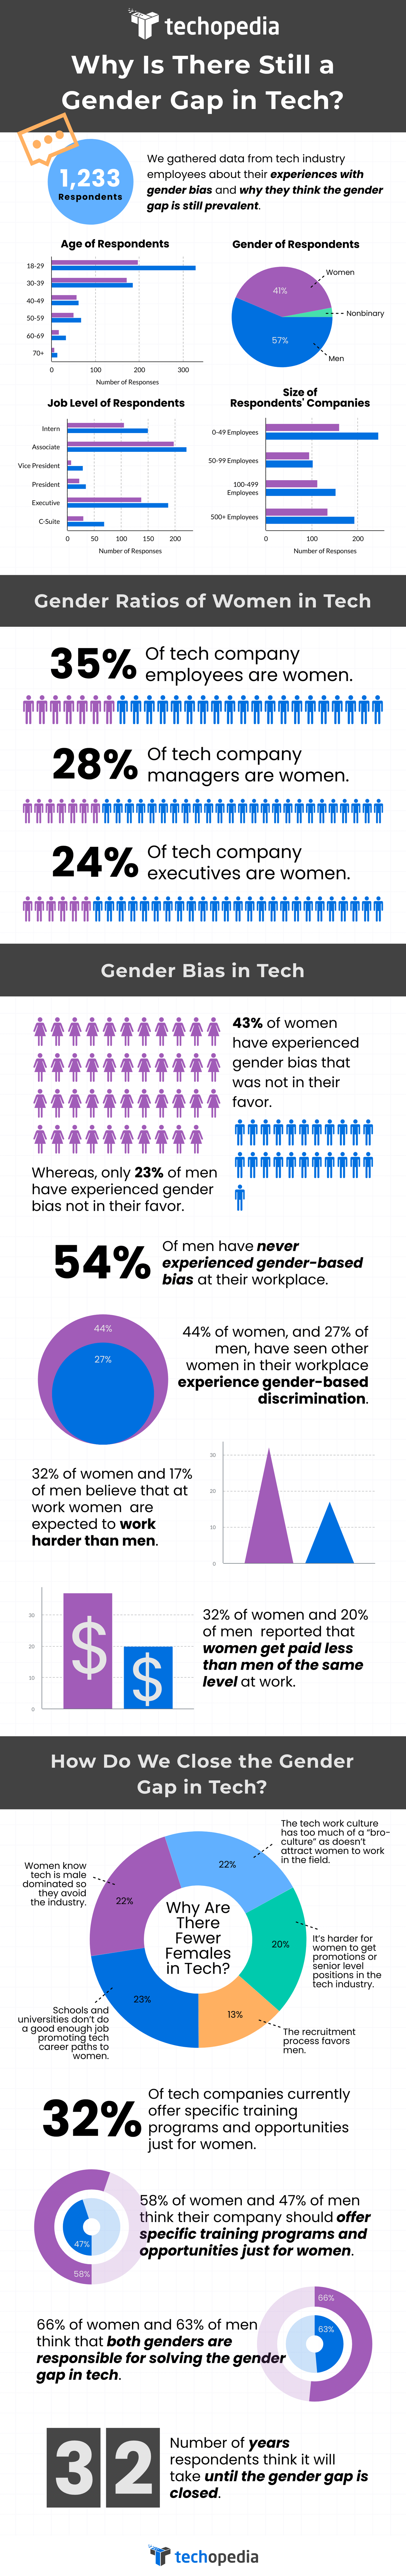 Why is there still a gender gap in tech infographic